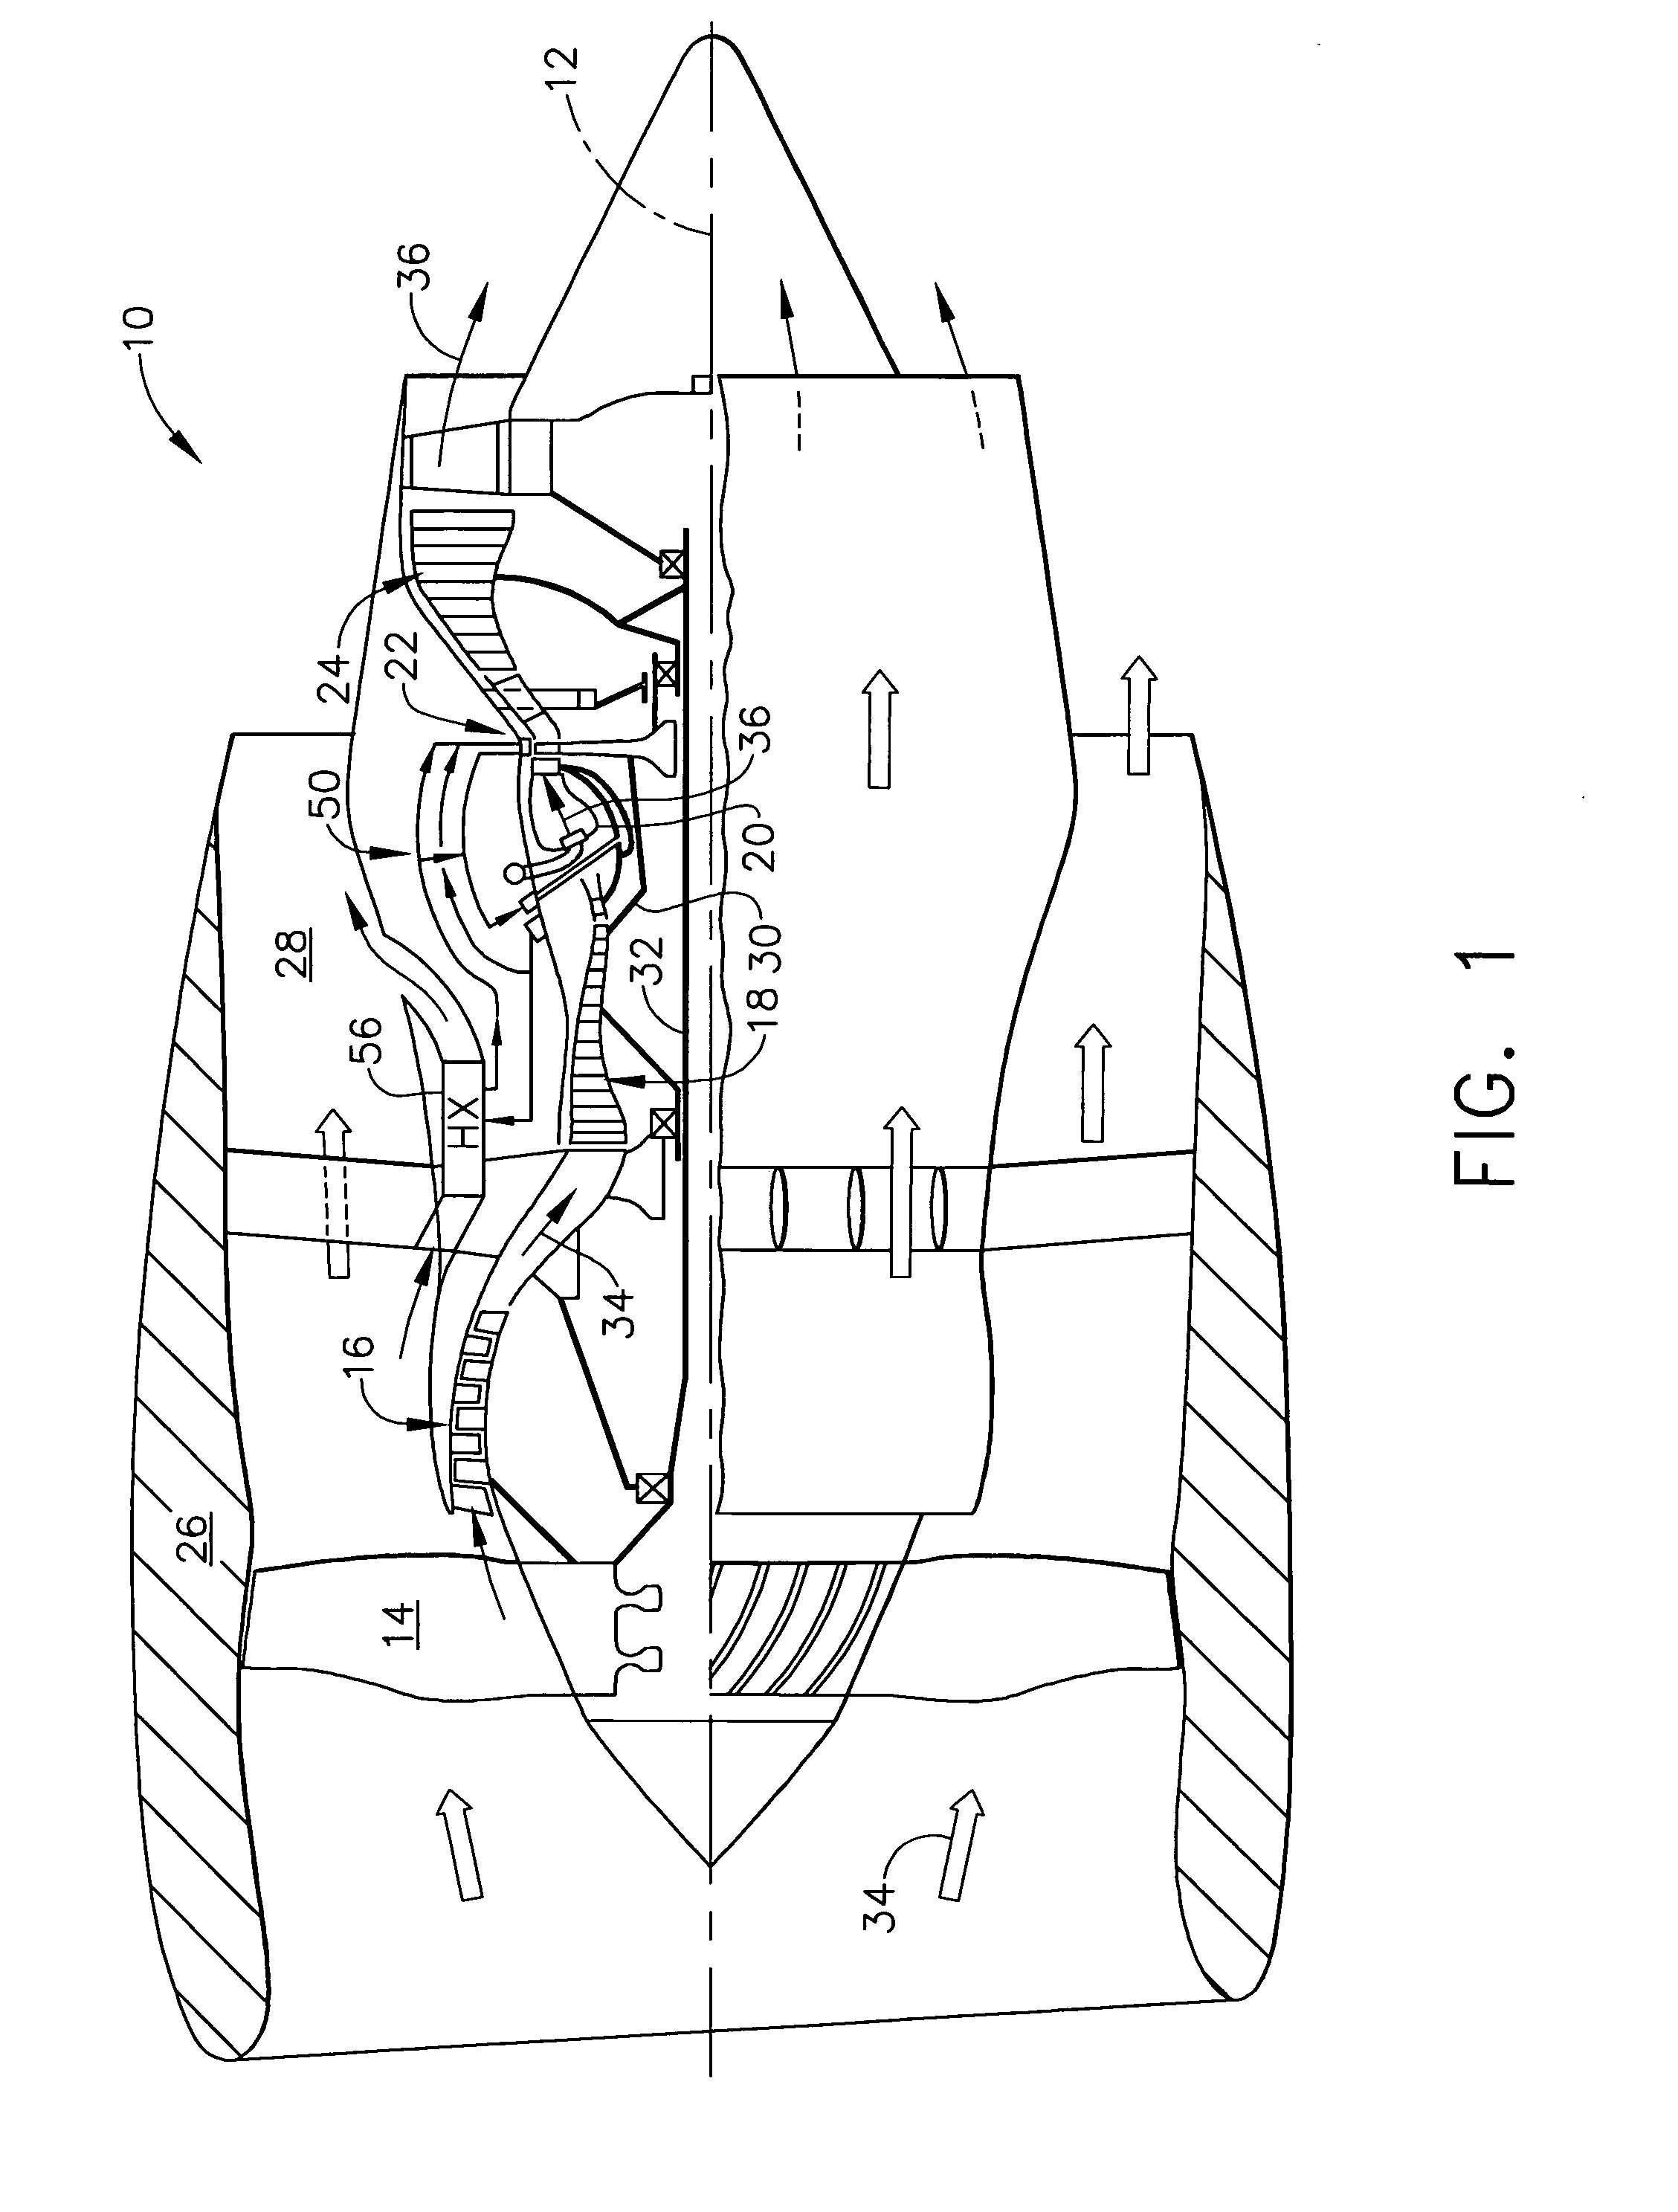 Compound clearance control engine